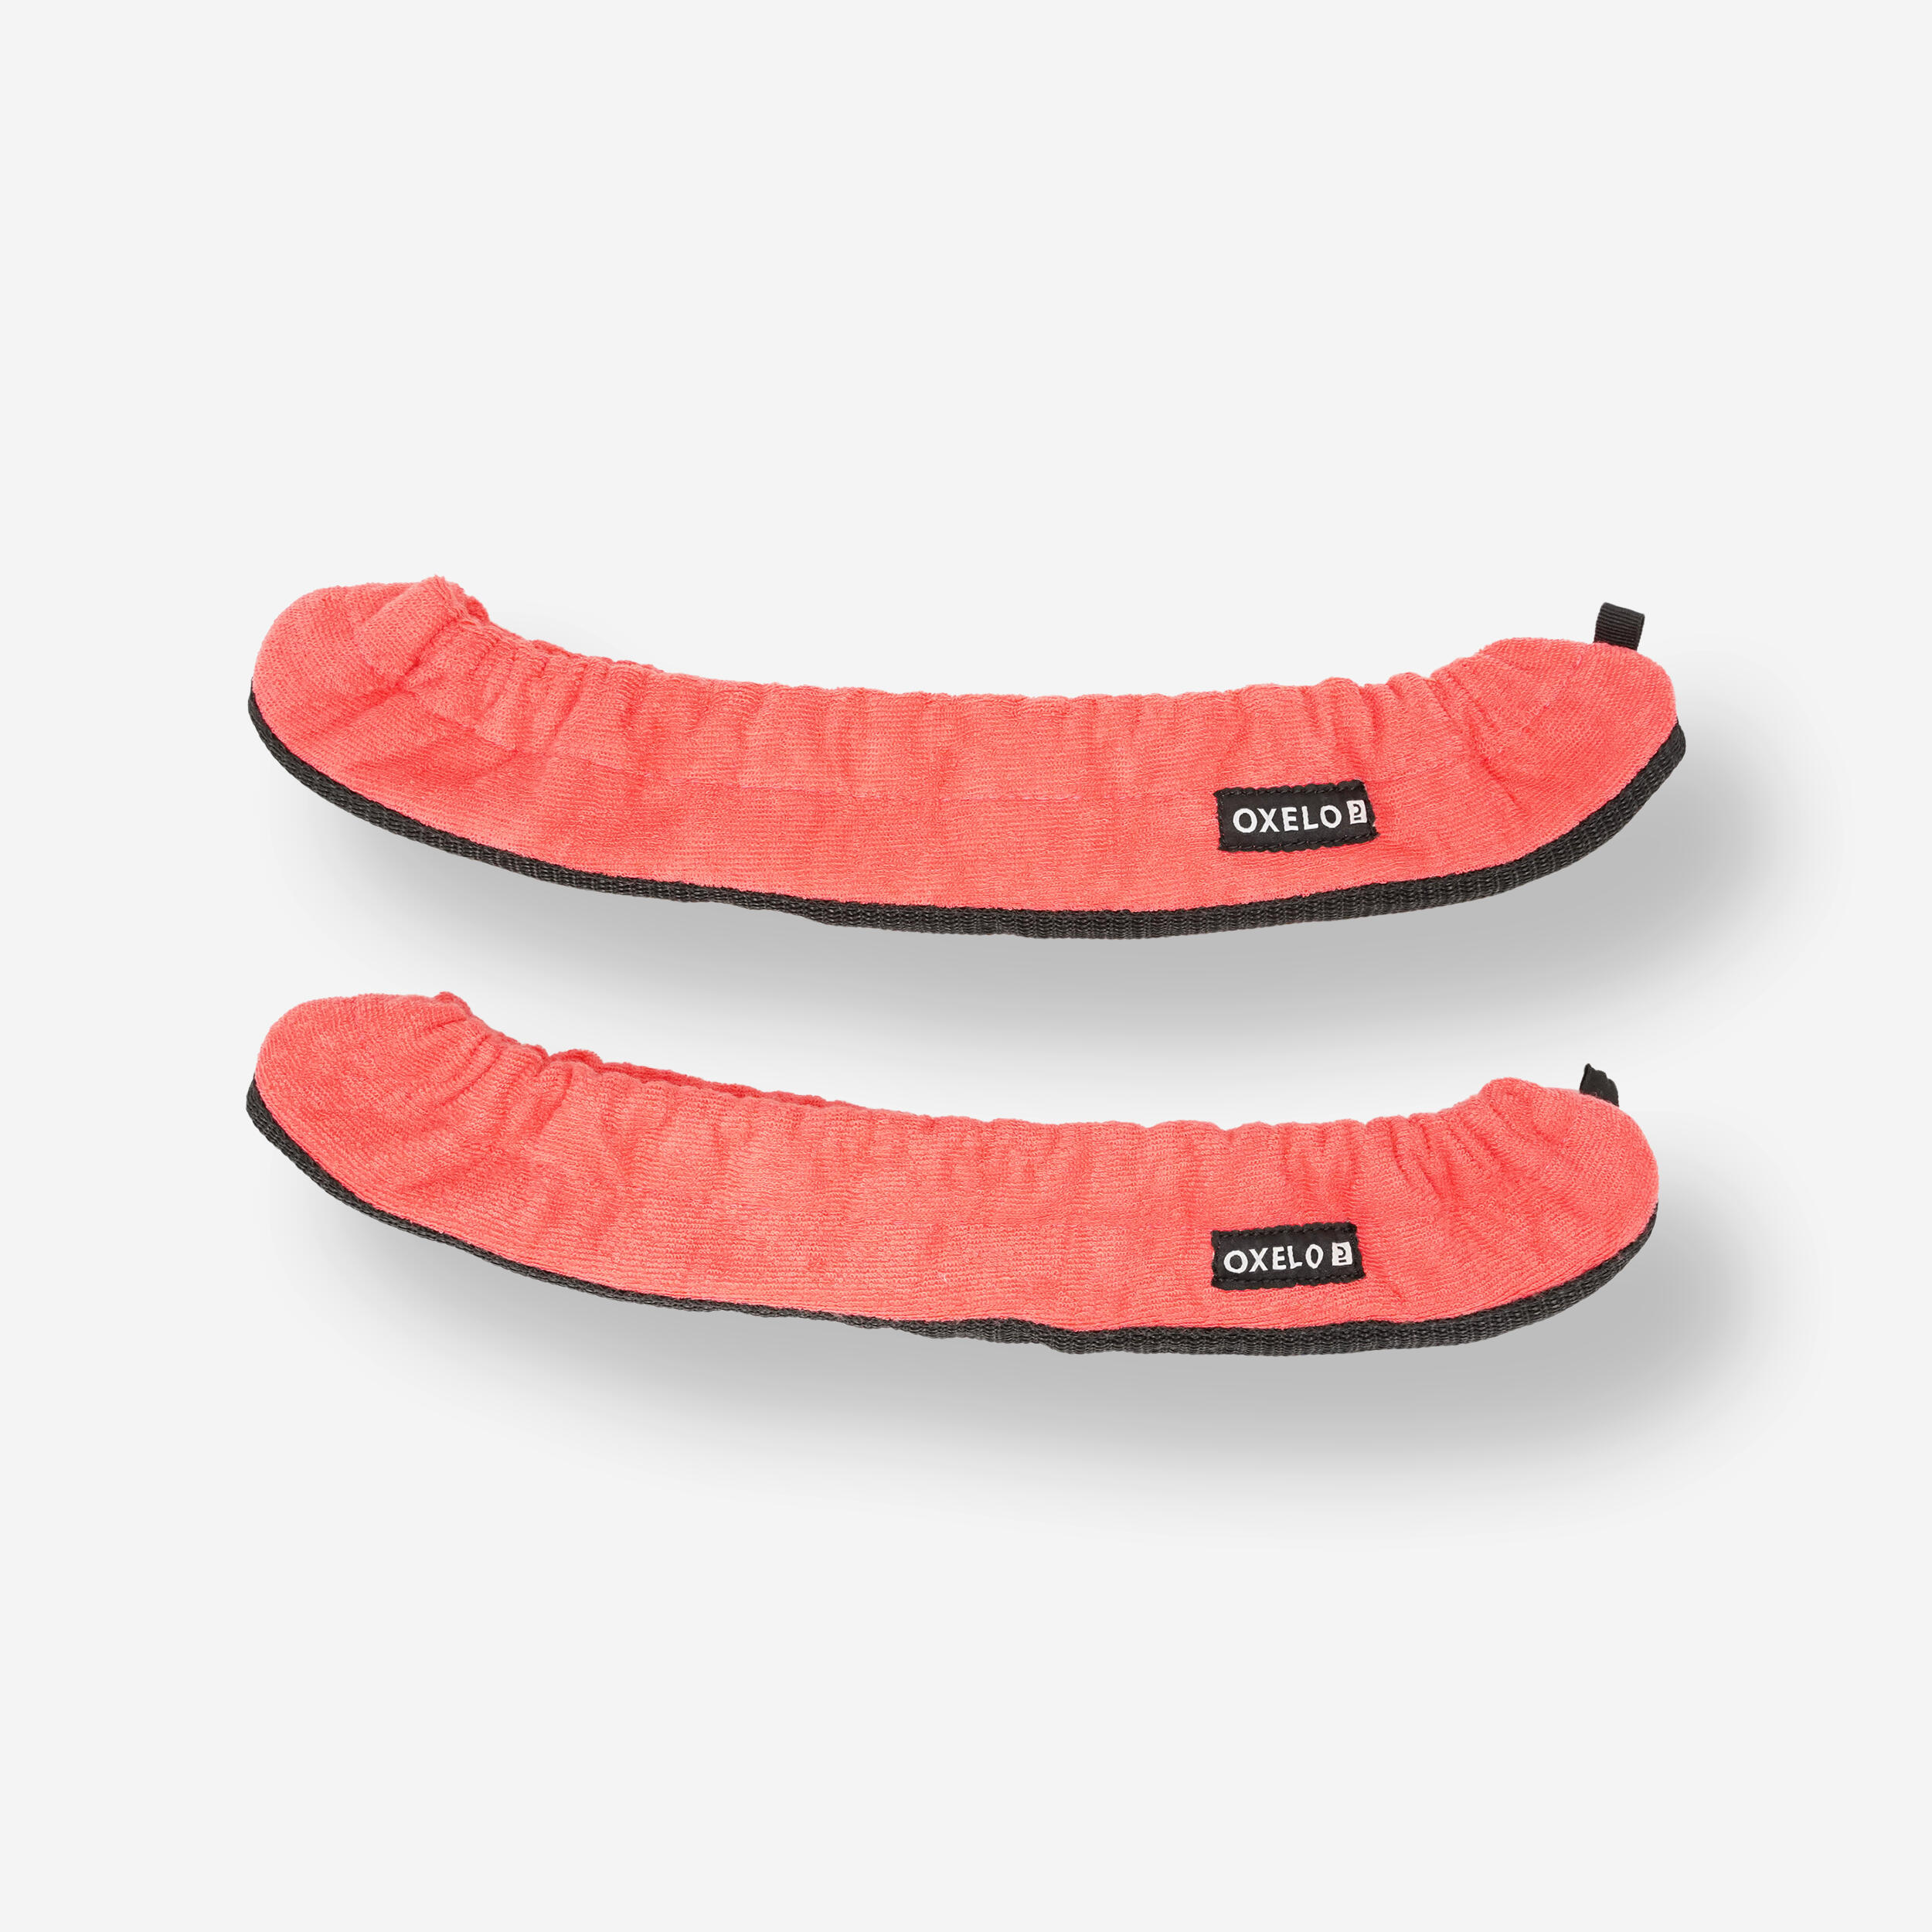 OXELO Ice Skate Blade Cover - Coral